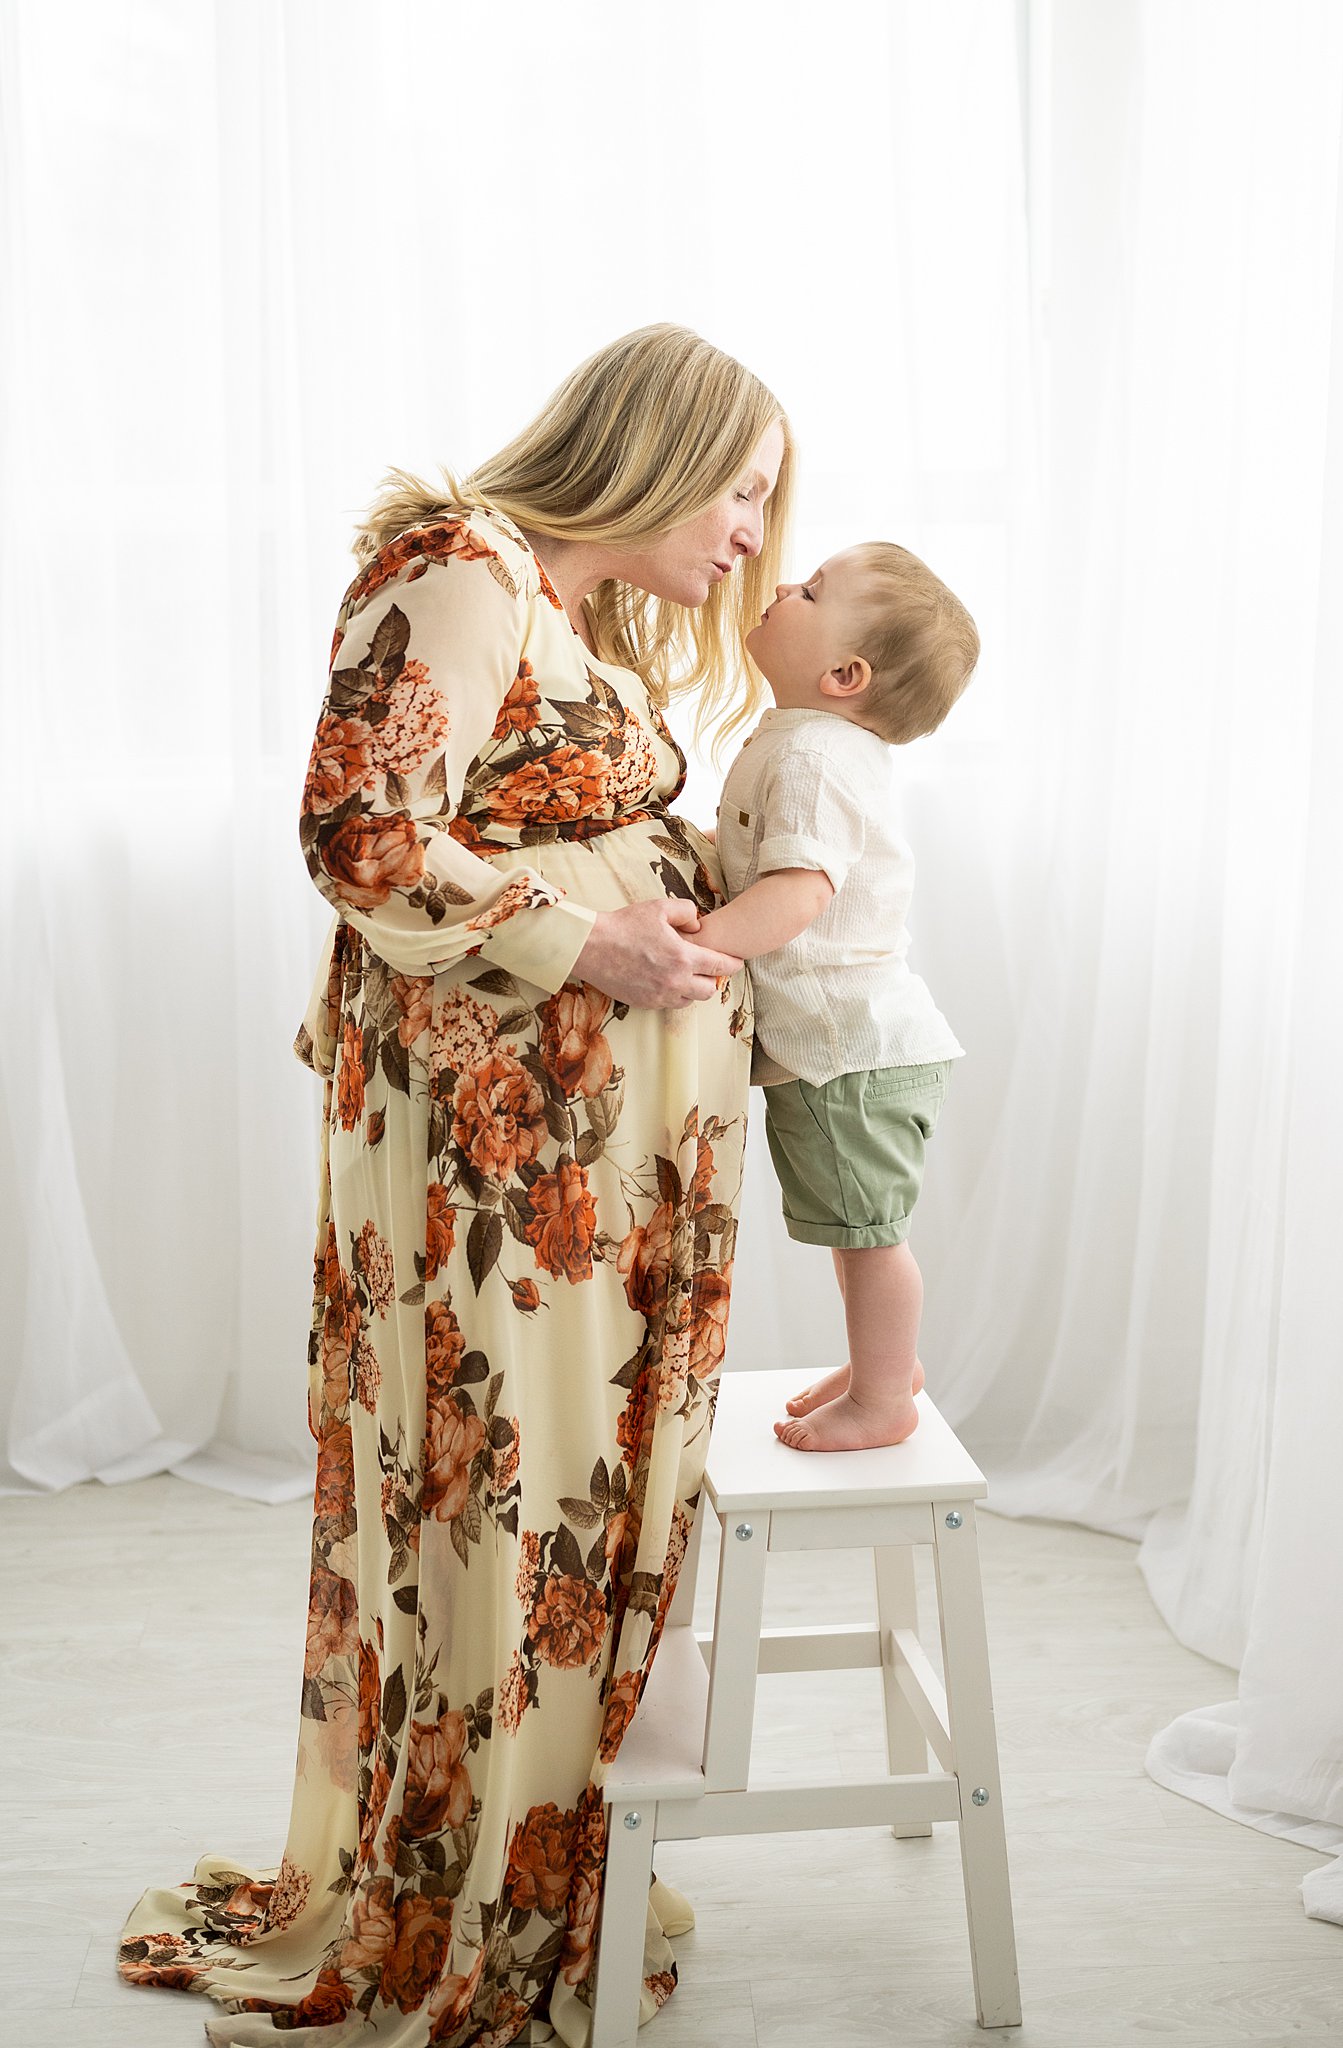 A pregnant mother in a floral dress leans down to kiss her toddler who is standing on a stool in a studio ottawa prenatal classes